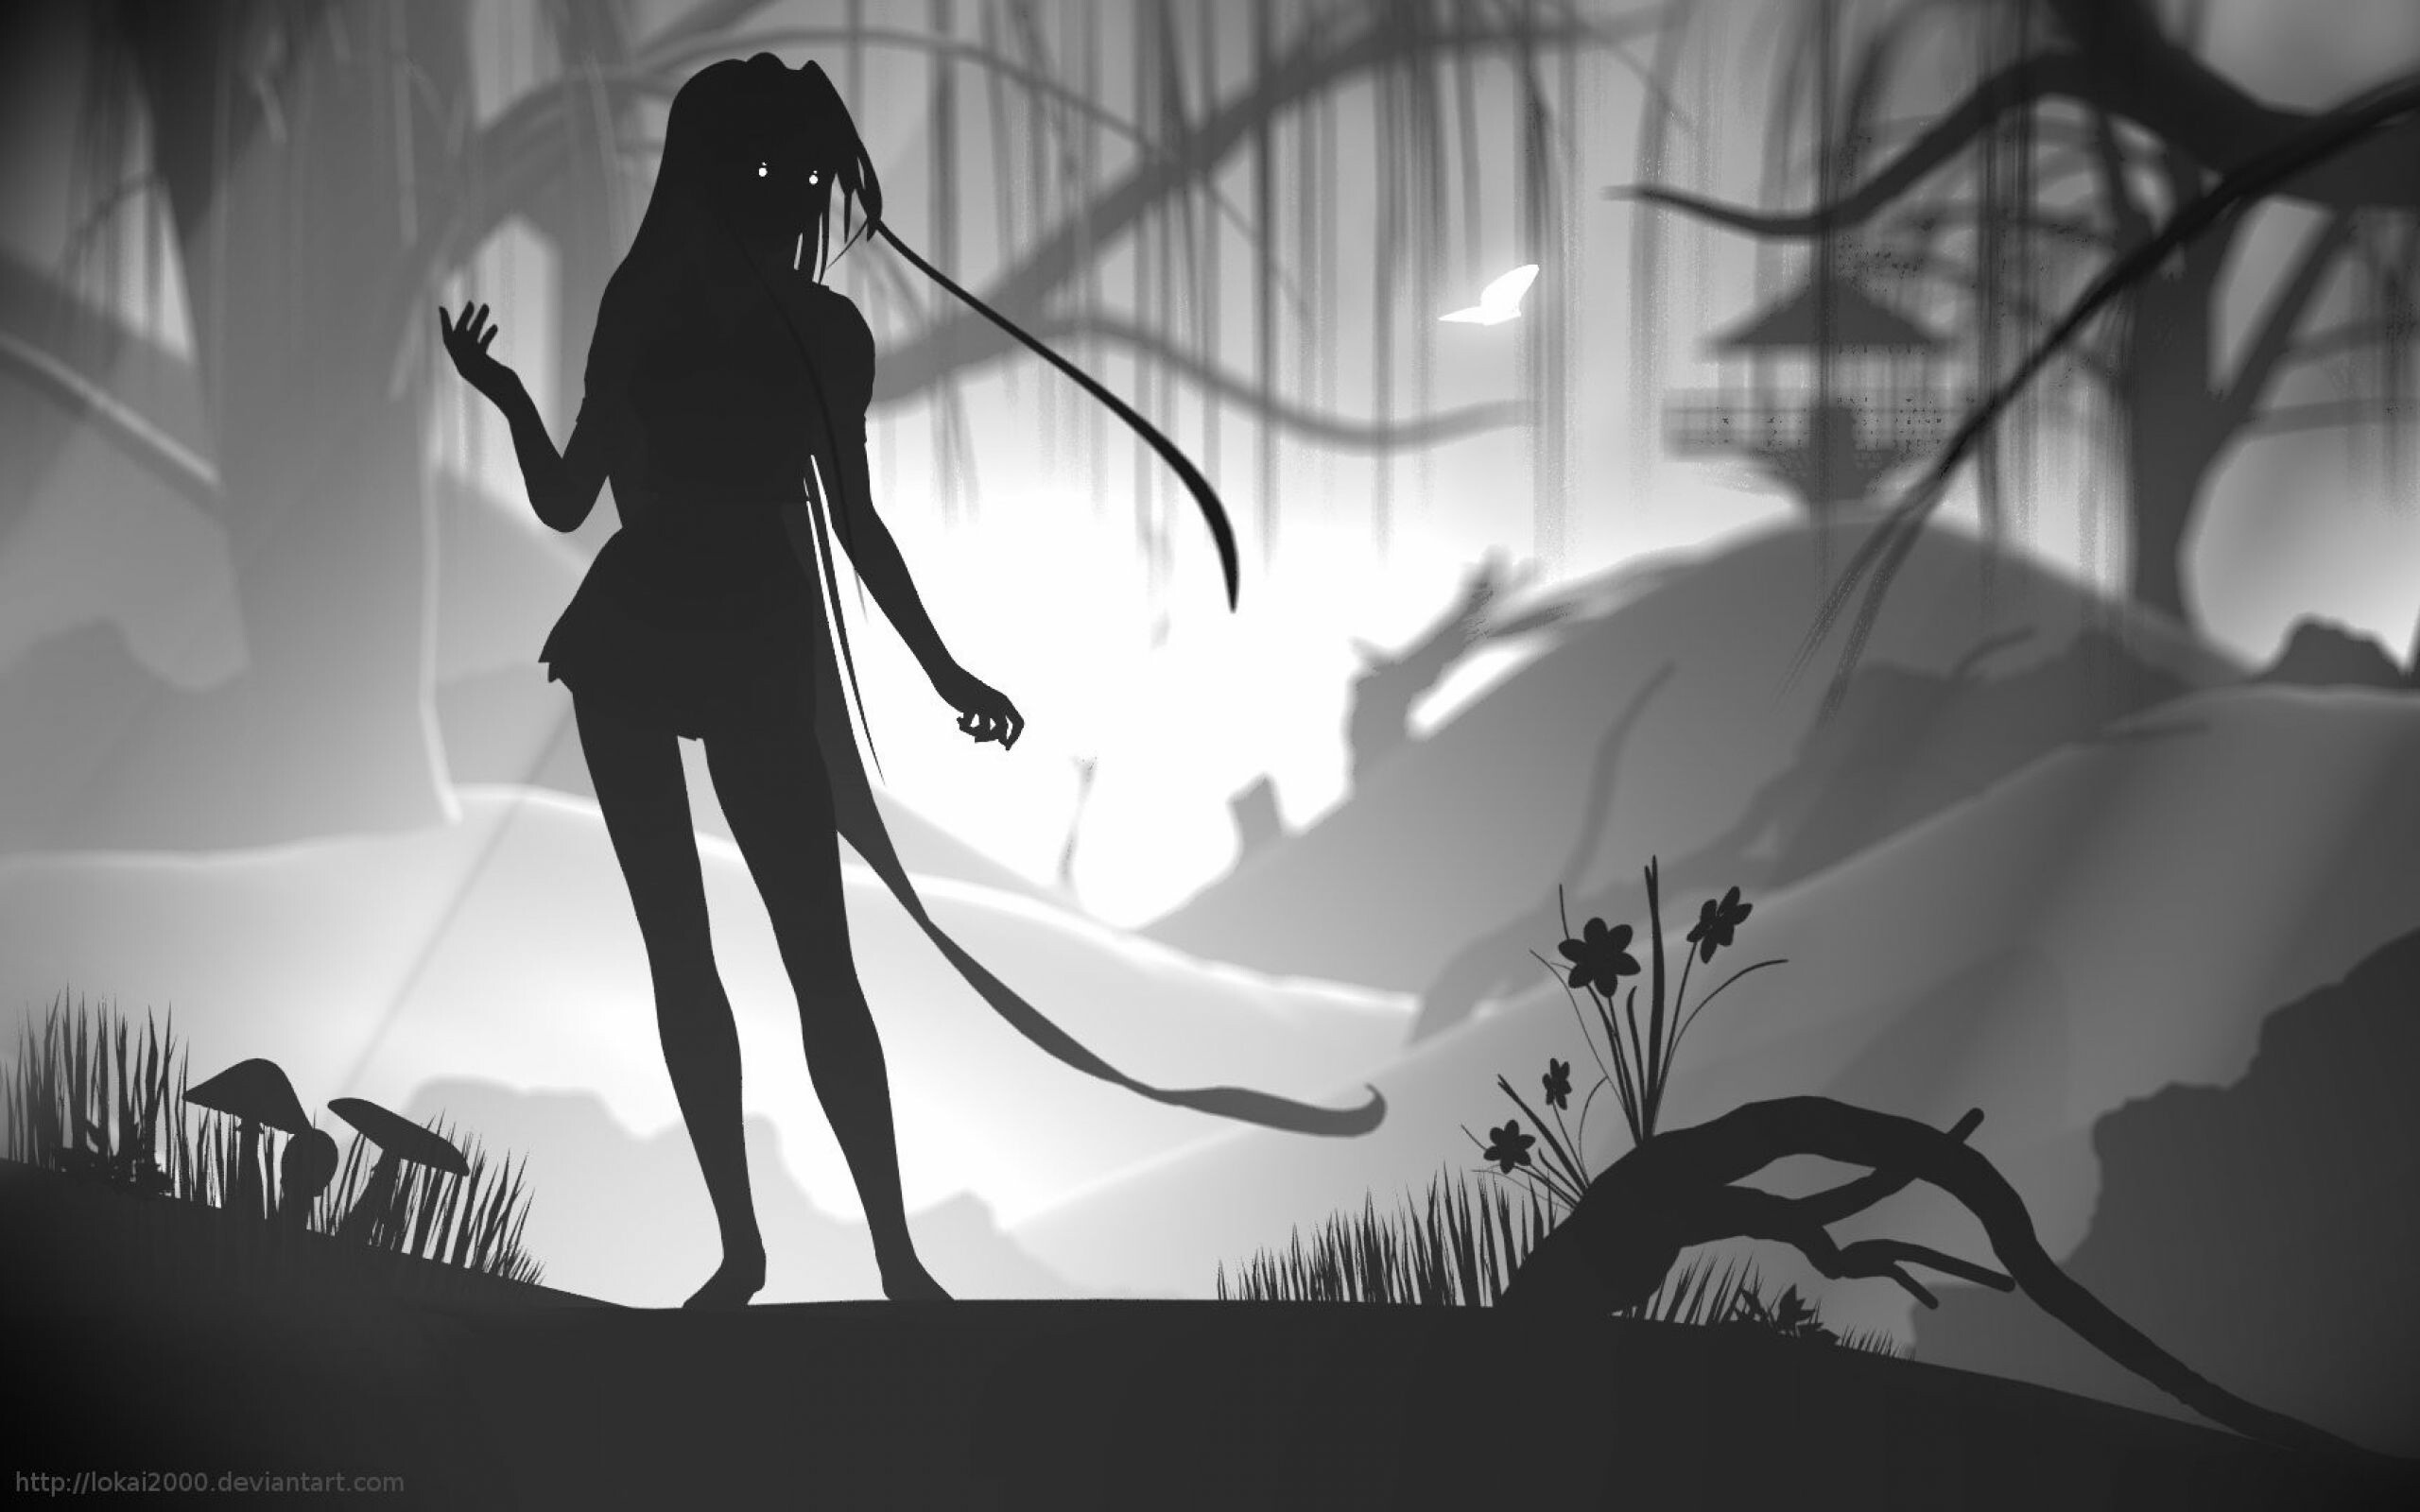 Limbo: Journalists praised the dark presentation, describing the work as comparable to film noir and German Expressionism. 2560x1600 HD Wallpaper.